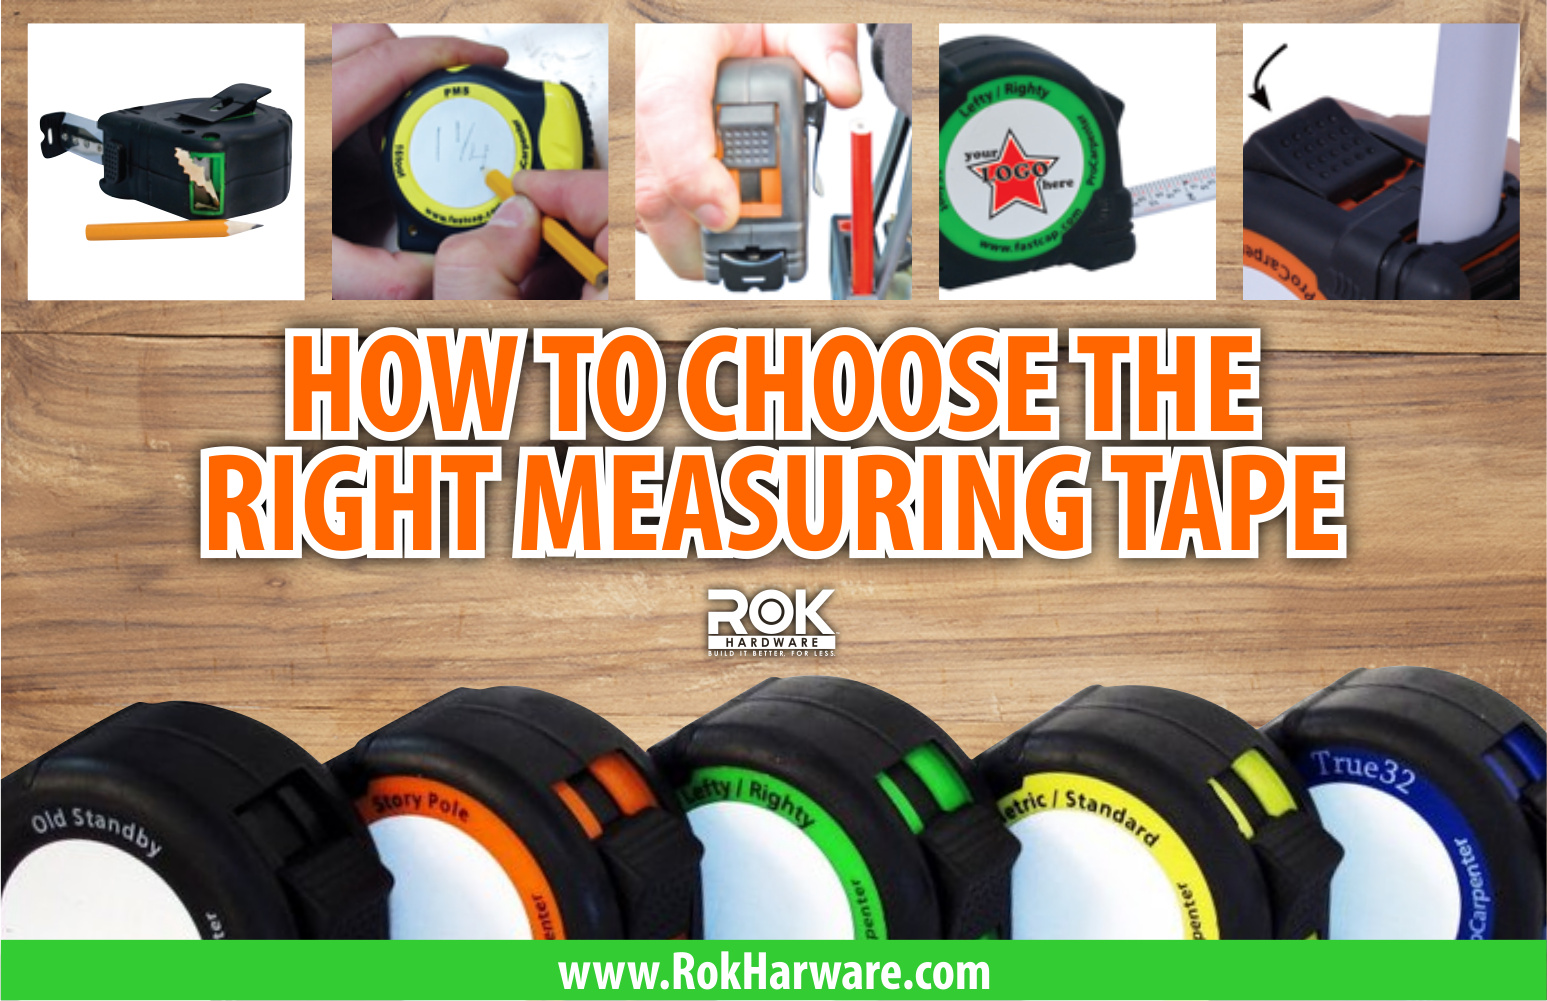 How to Choose the Right Measuring Tape